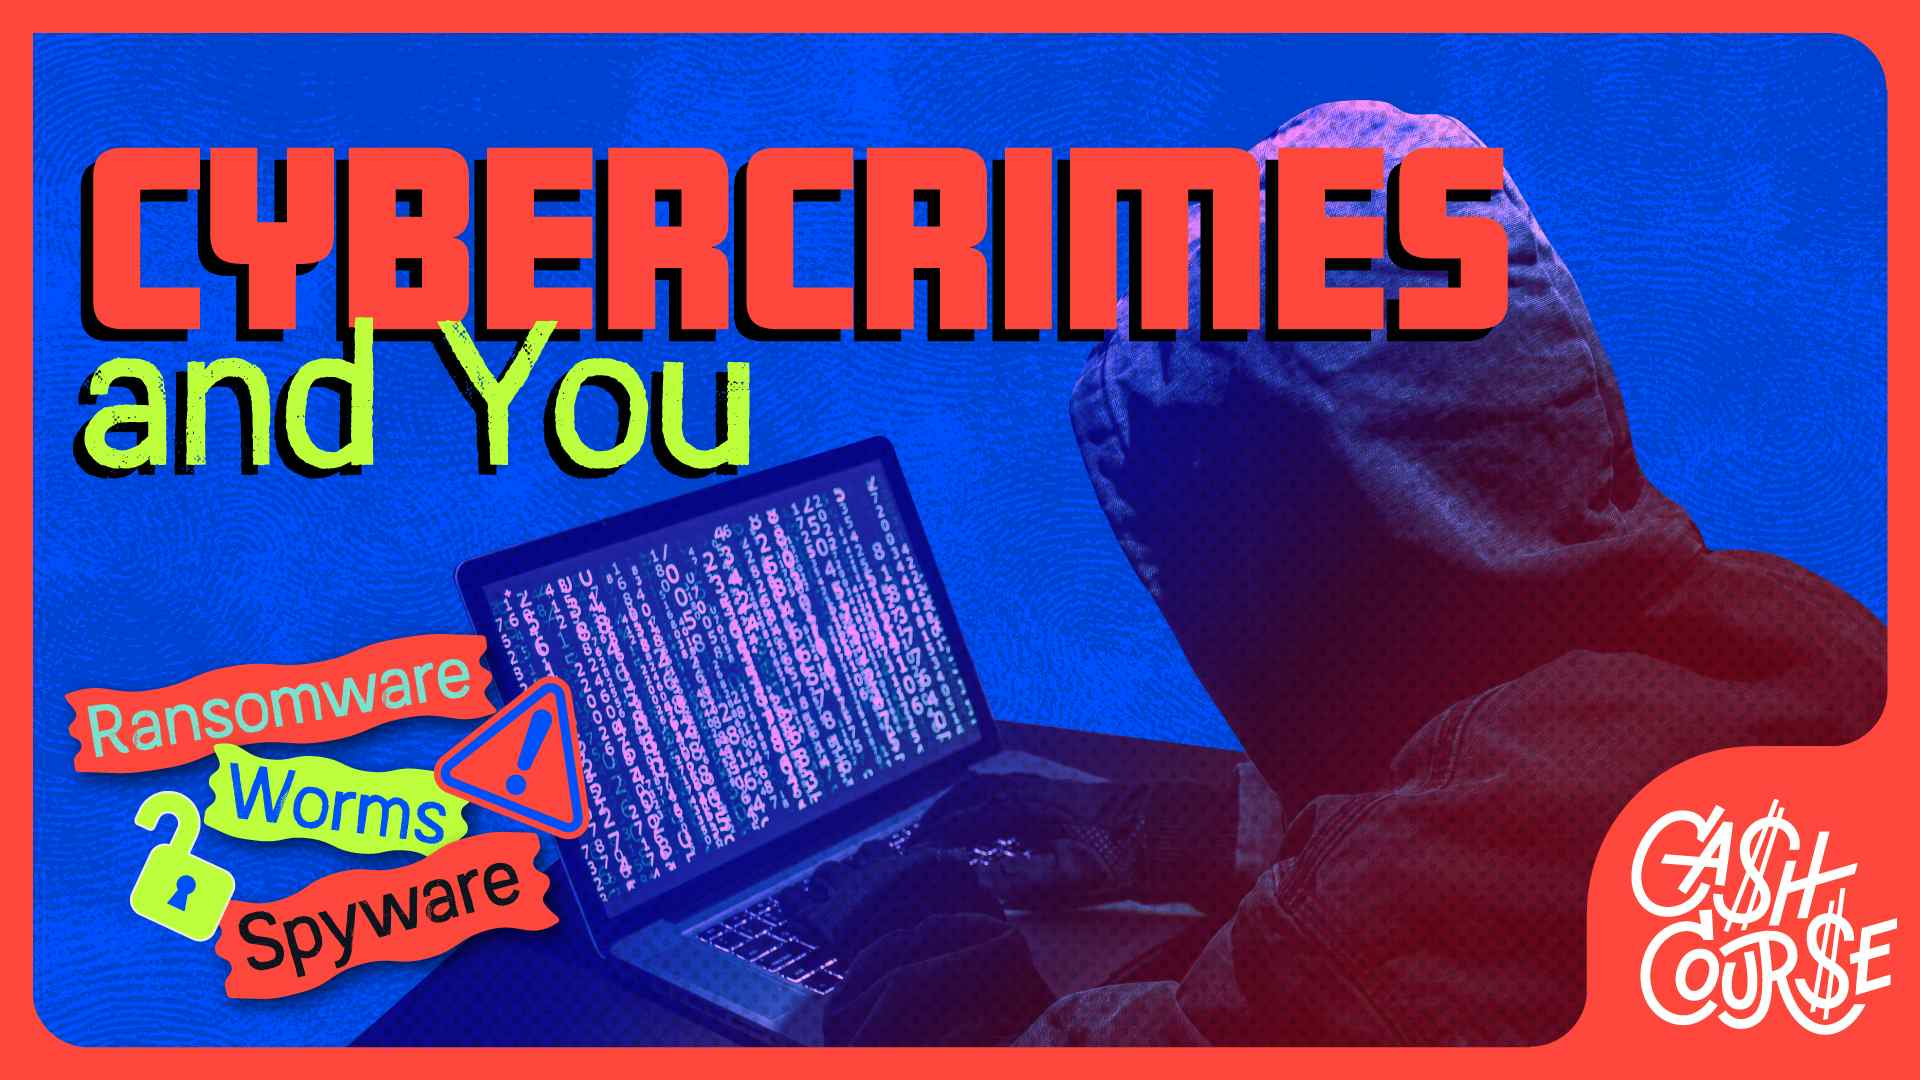 Cybercrimes and You